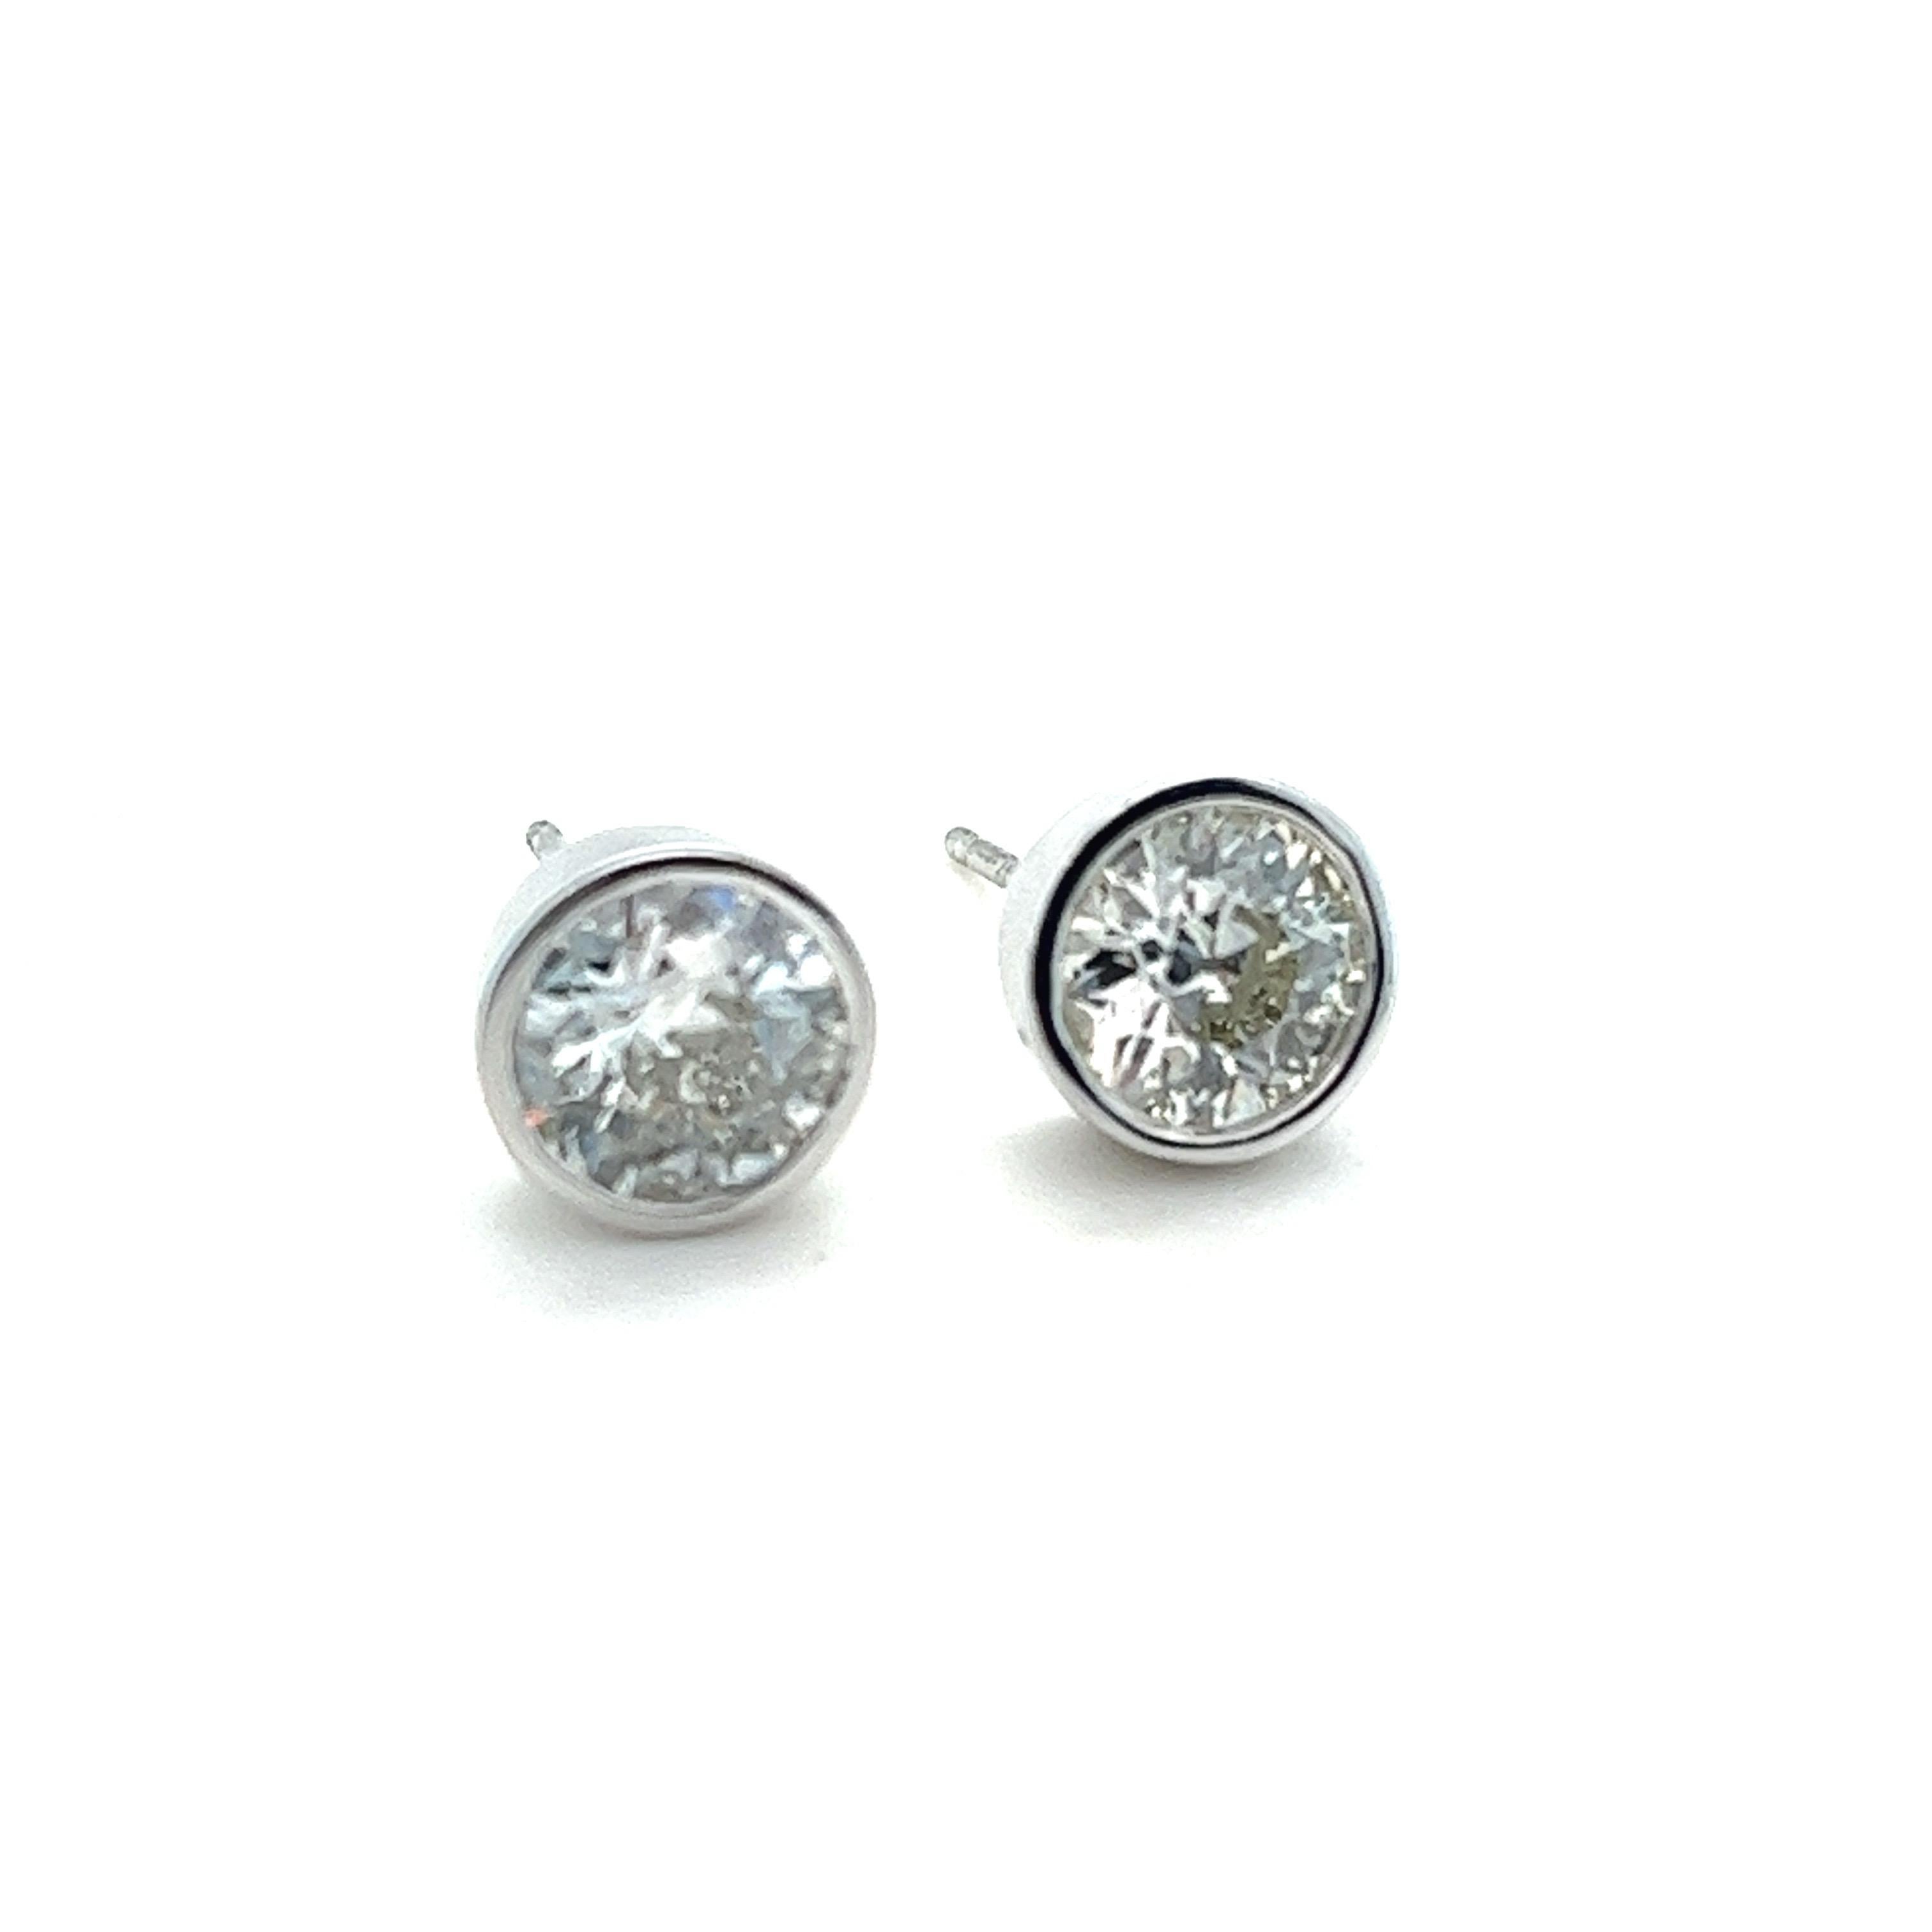 
Offered here is a mesmerizing pair of natural Old European cut diamonds elegantly set in platinum bezel stud earrings. These exquisite diamonds, originating from the Art Deco period, have been skillfully remounted in a contemporary design to